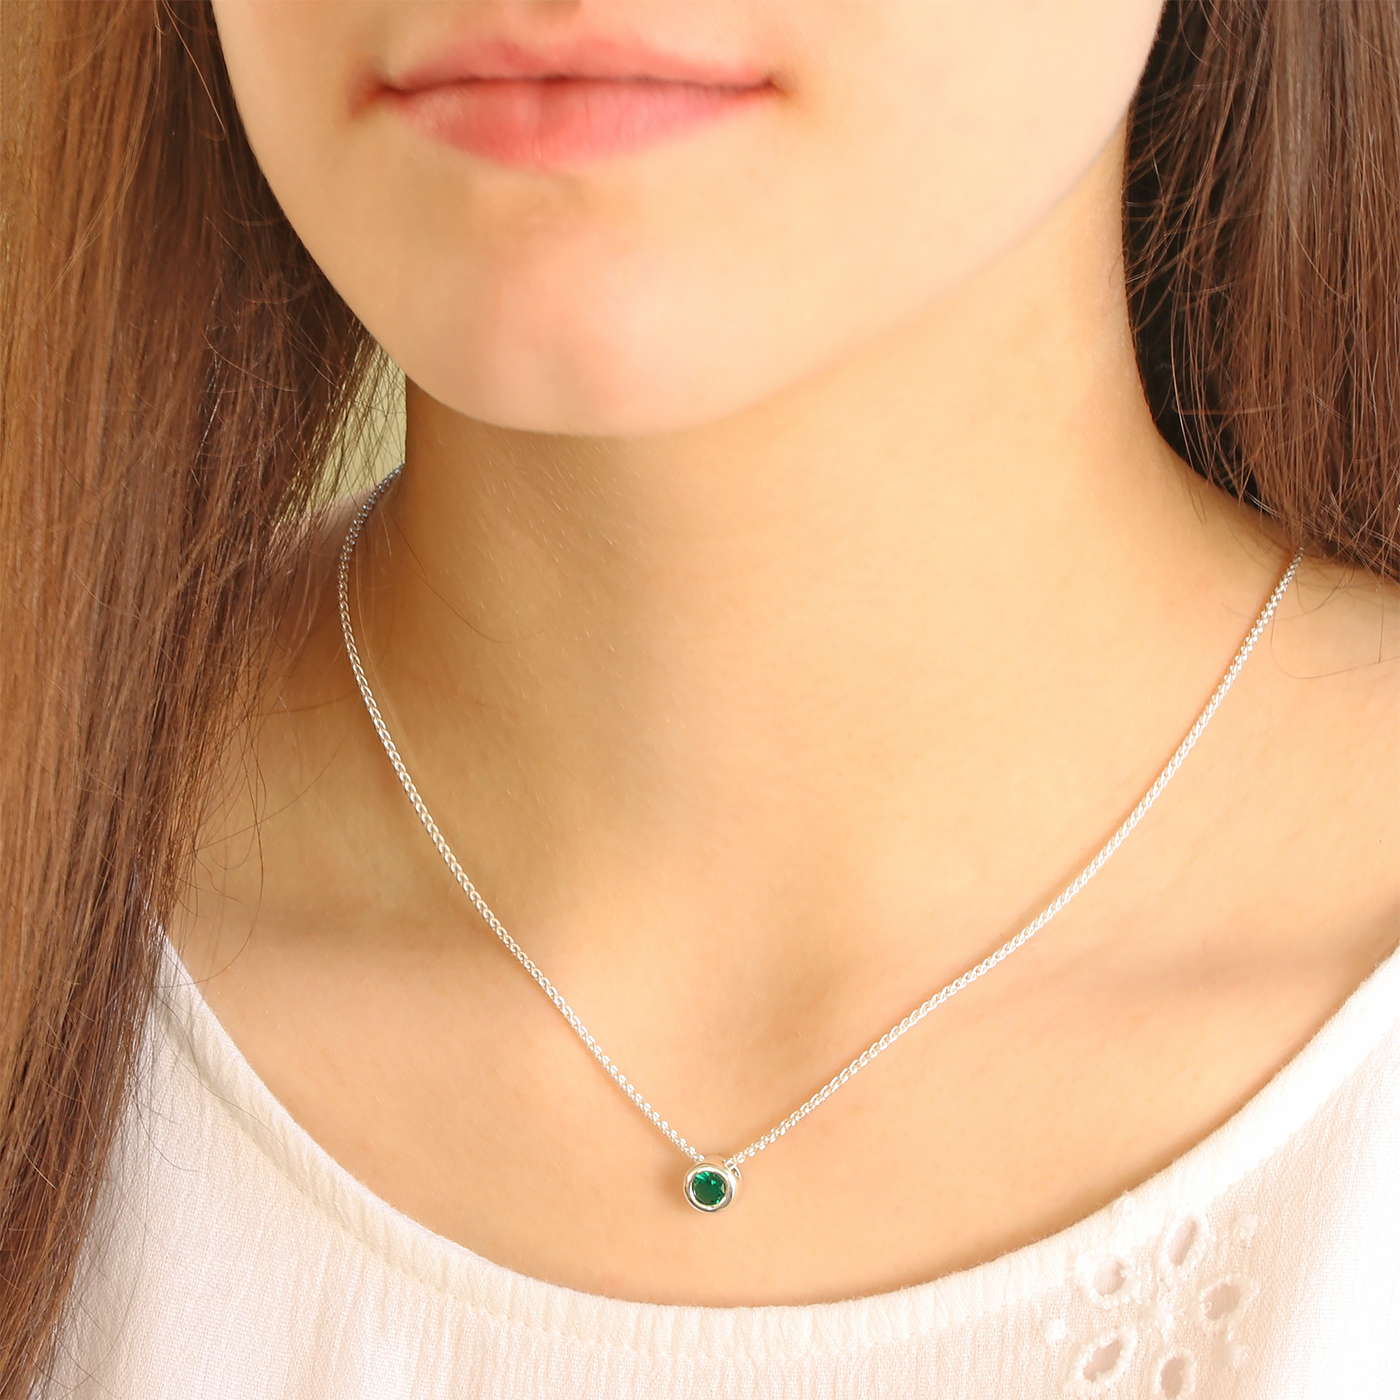 A woman wearing a silver emerald birthstone necklace